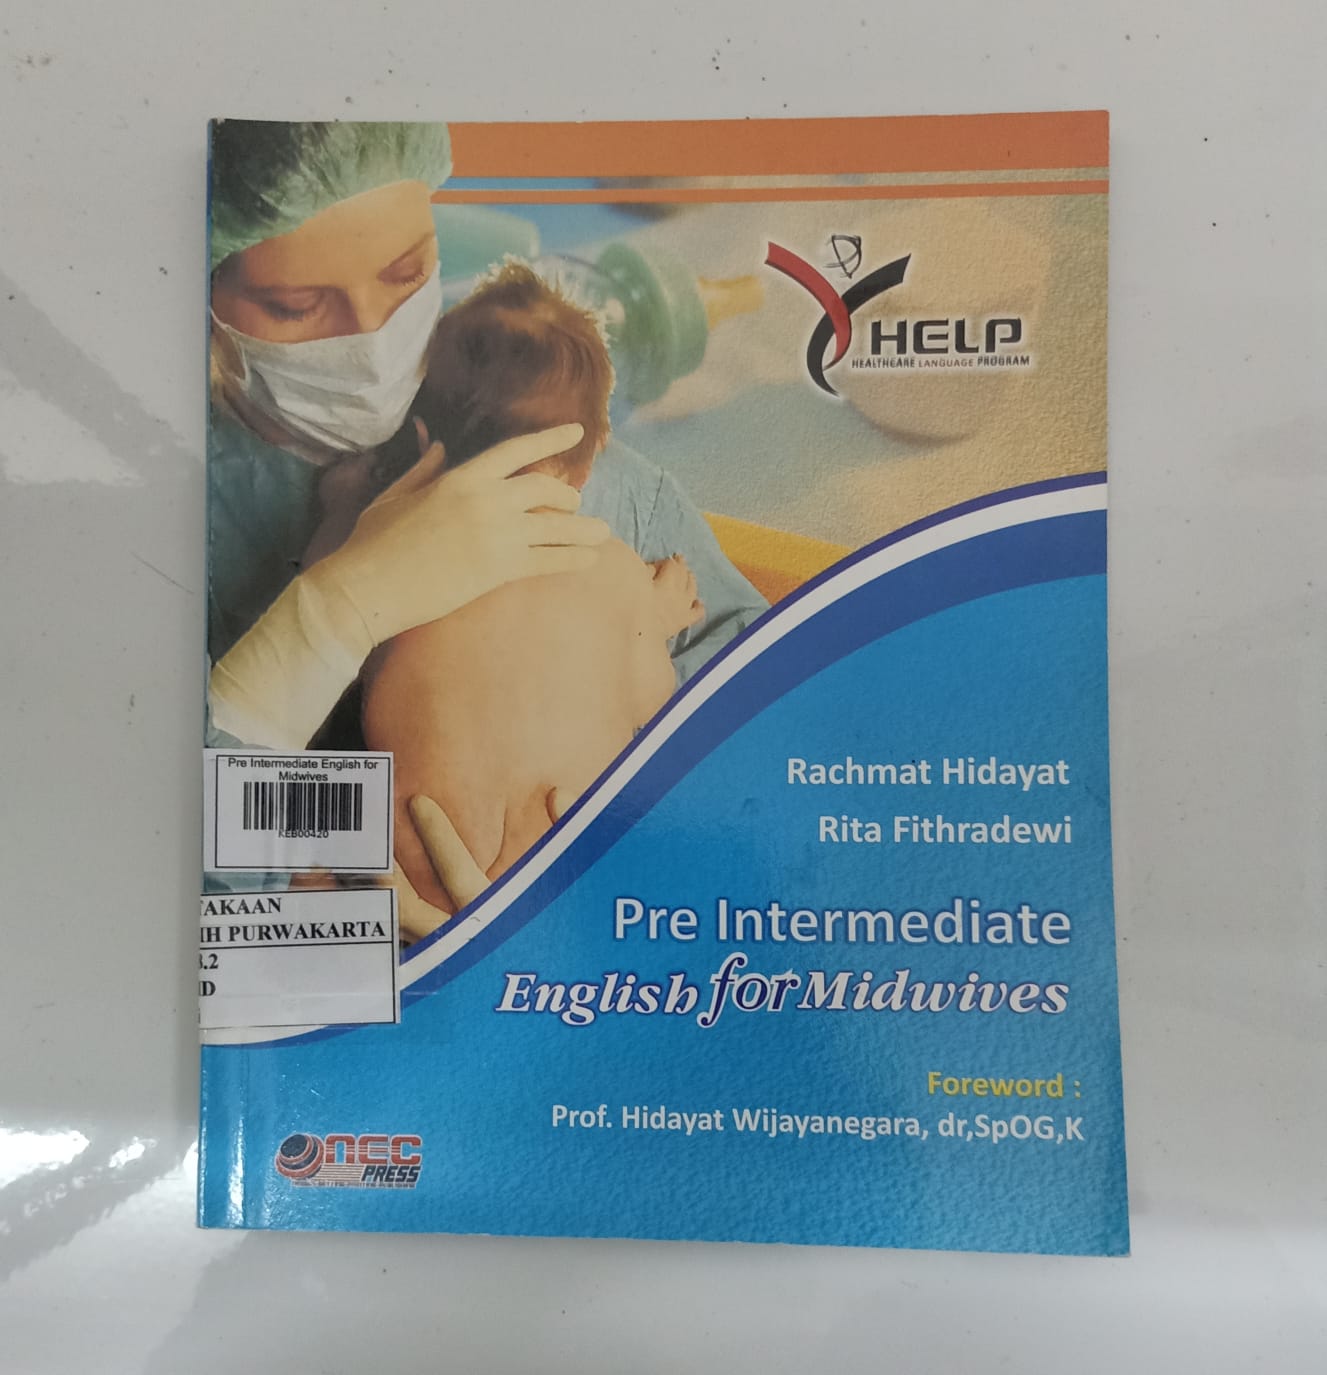 Pre Intermediate English for Midwives